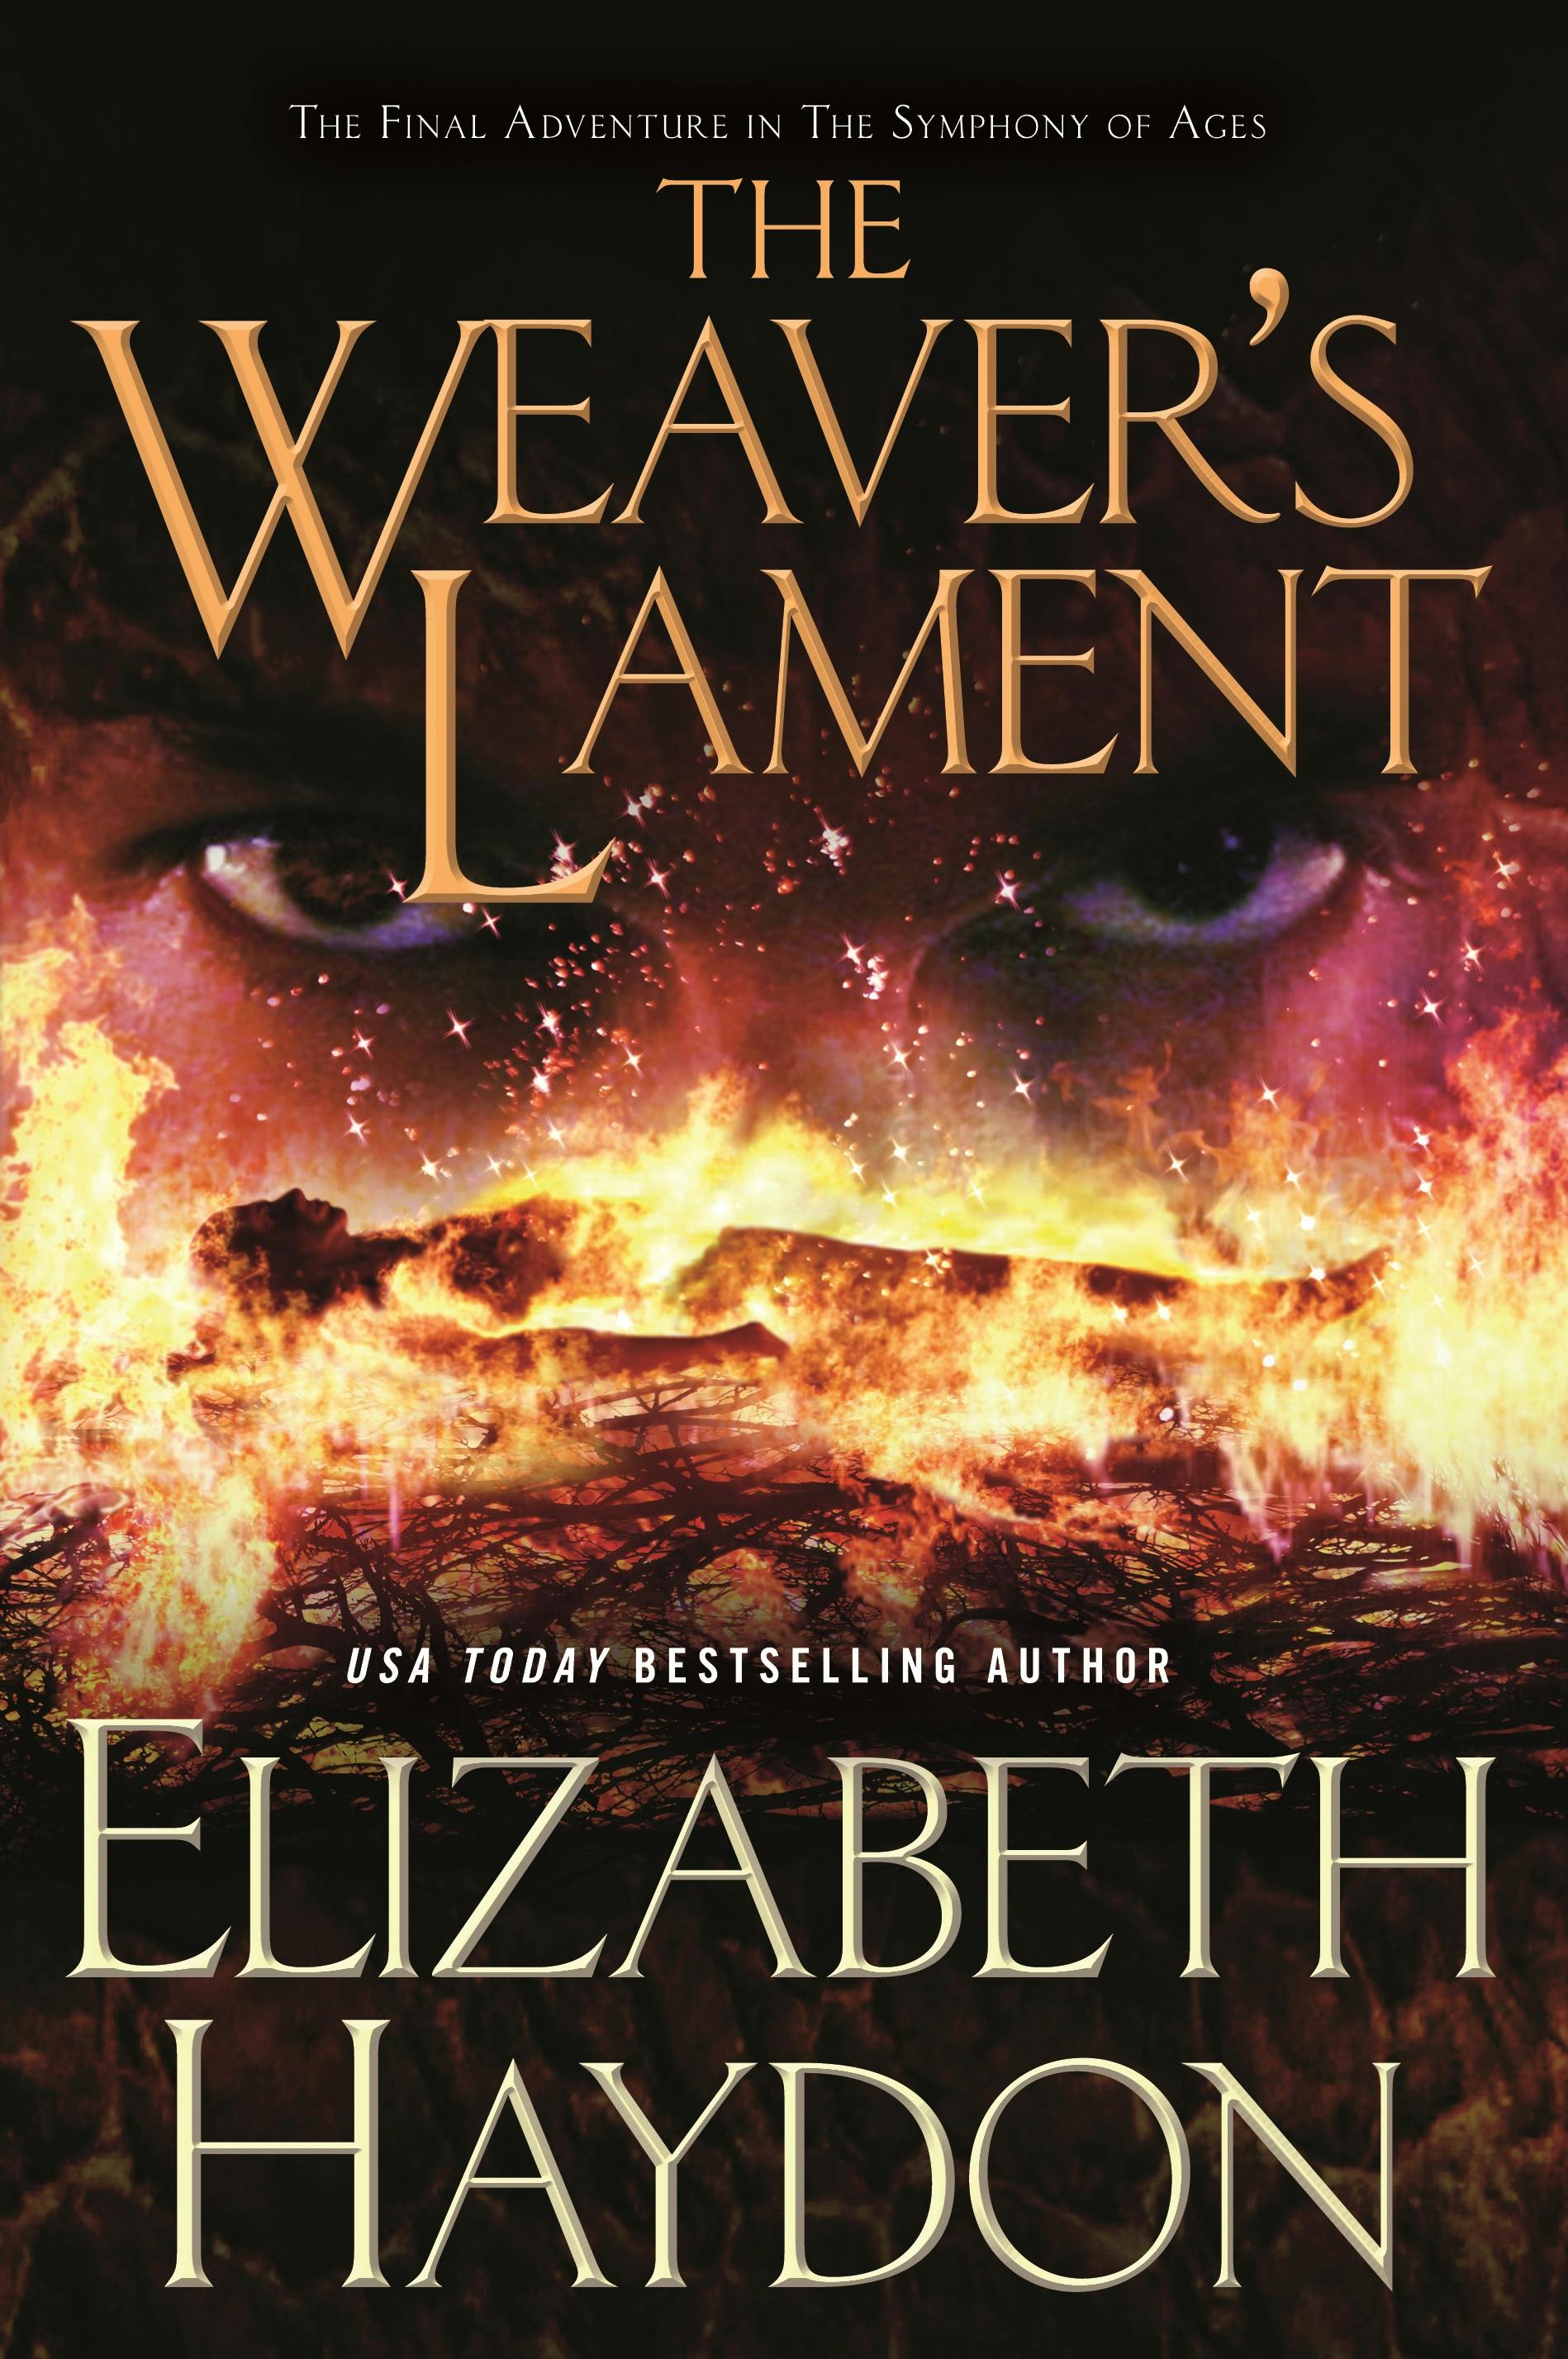 Cover for the book titled as: The Weaver's Lament